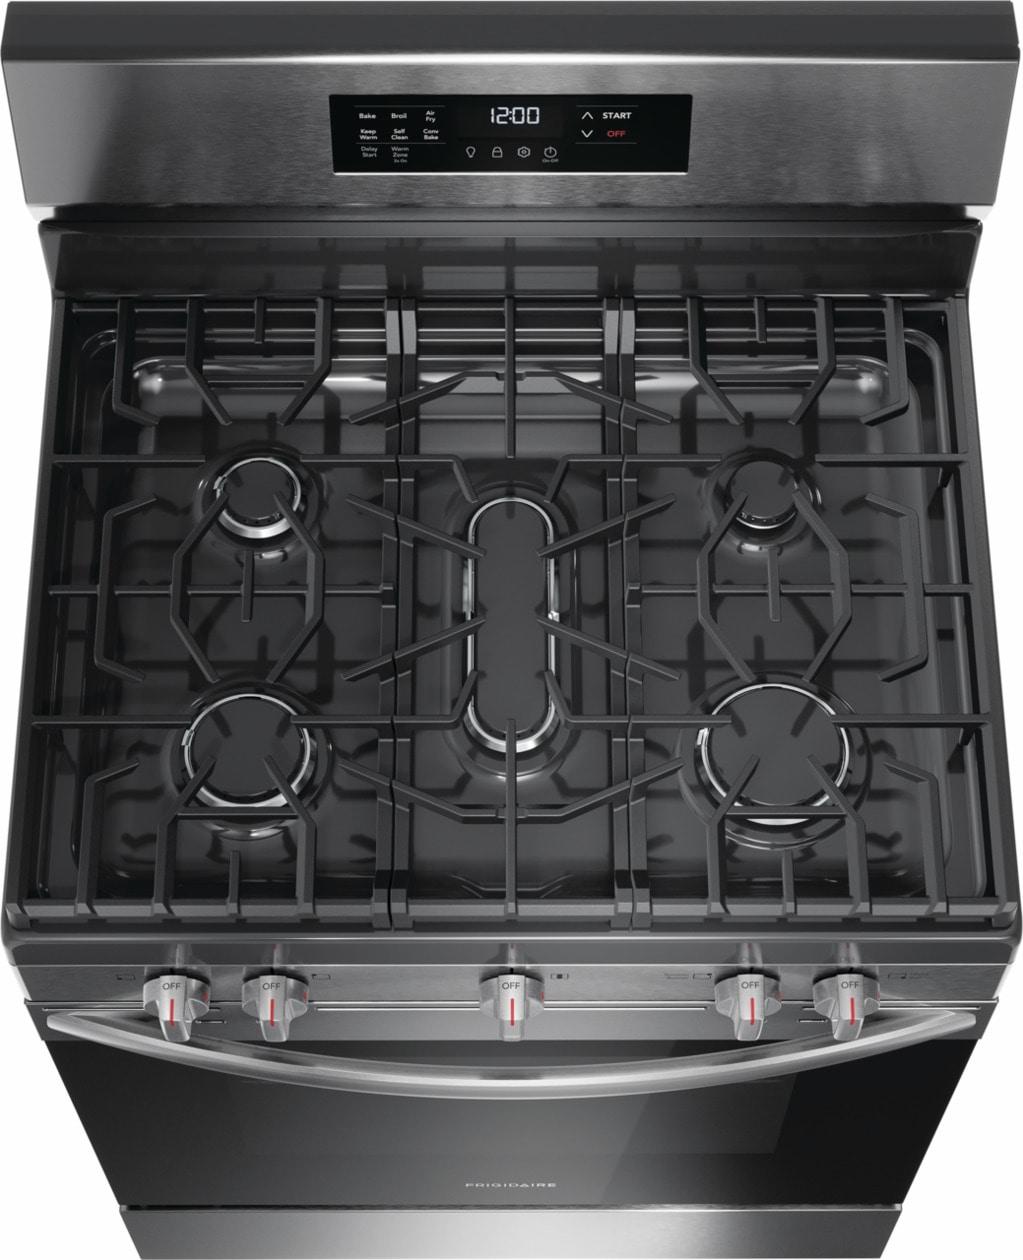 Frigidaire 30" Gas Range with Air Fry